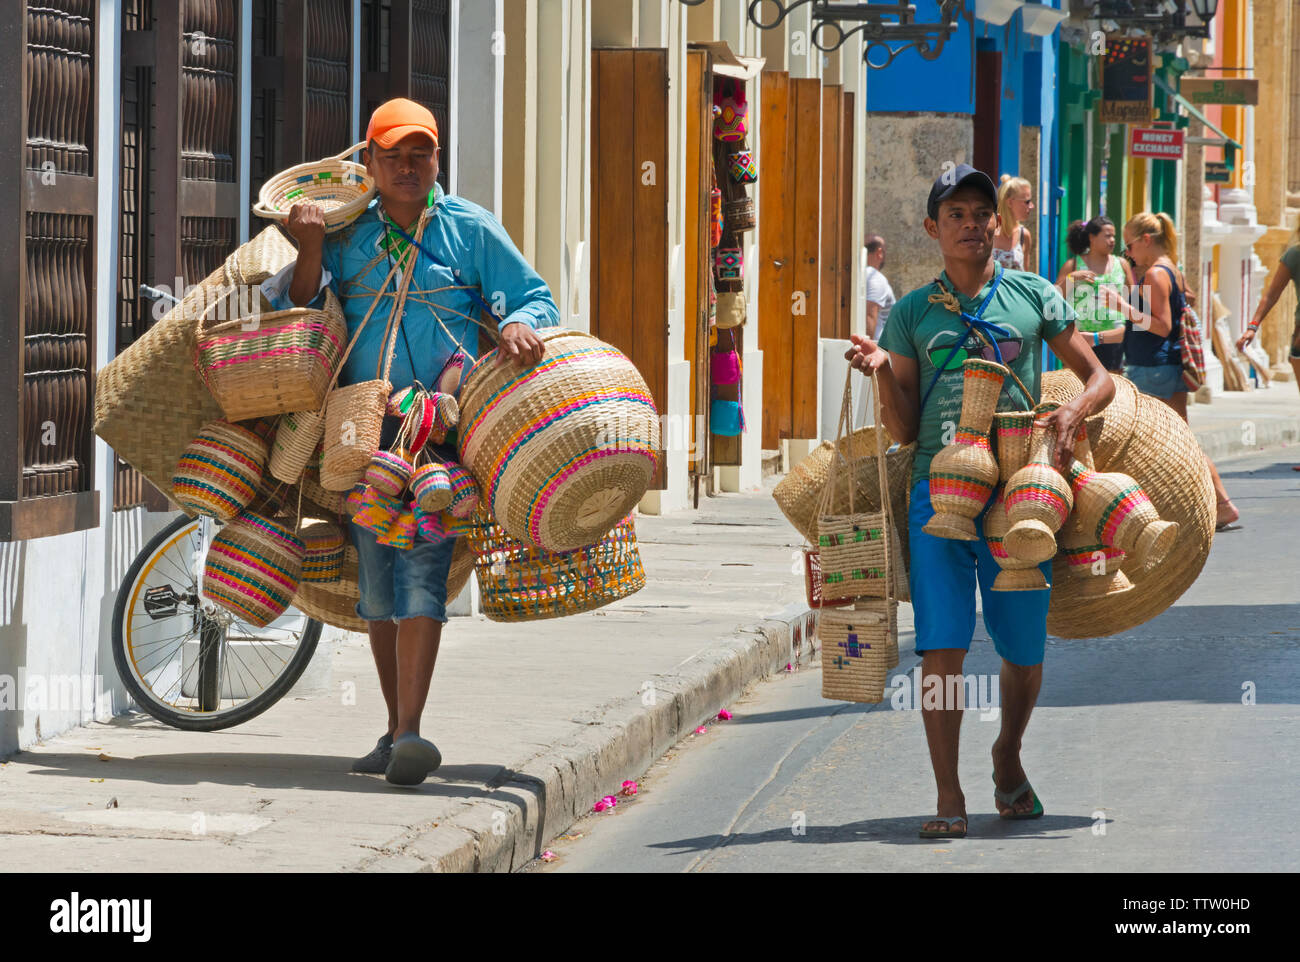 Vendors carrying basket on the street of the old town, Cartagena, UNESCO World Heritage site, Bolivar Department, Colombia Stock Photo